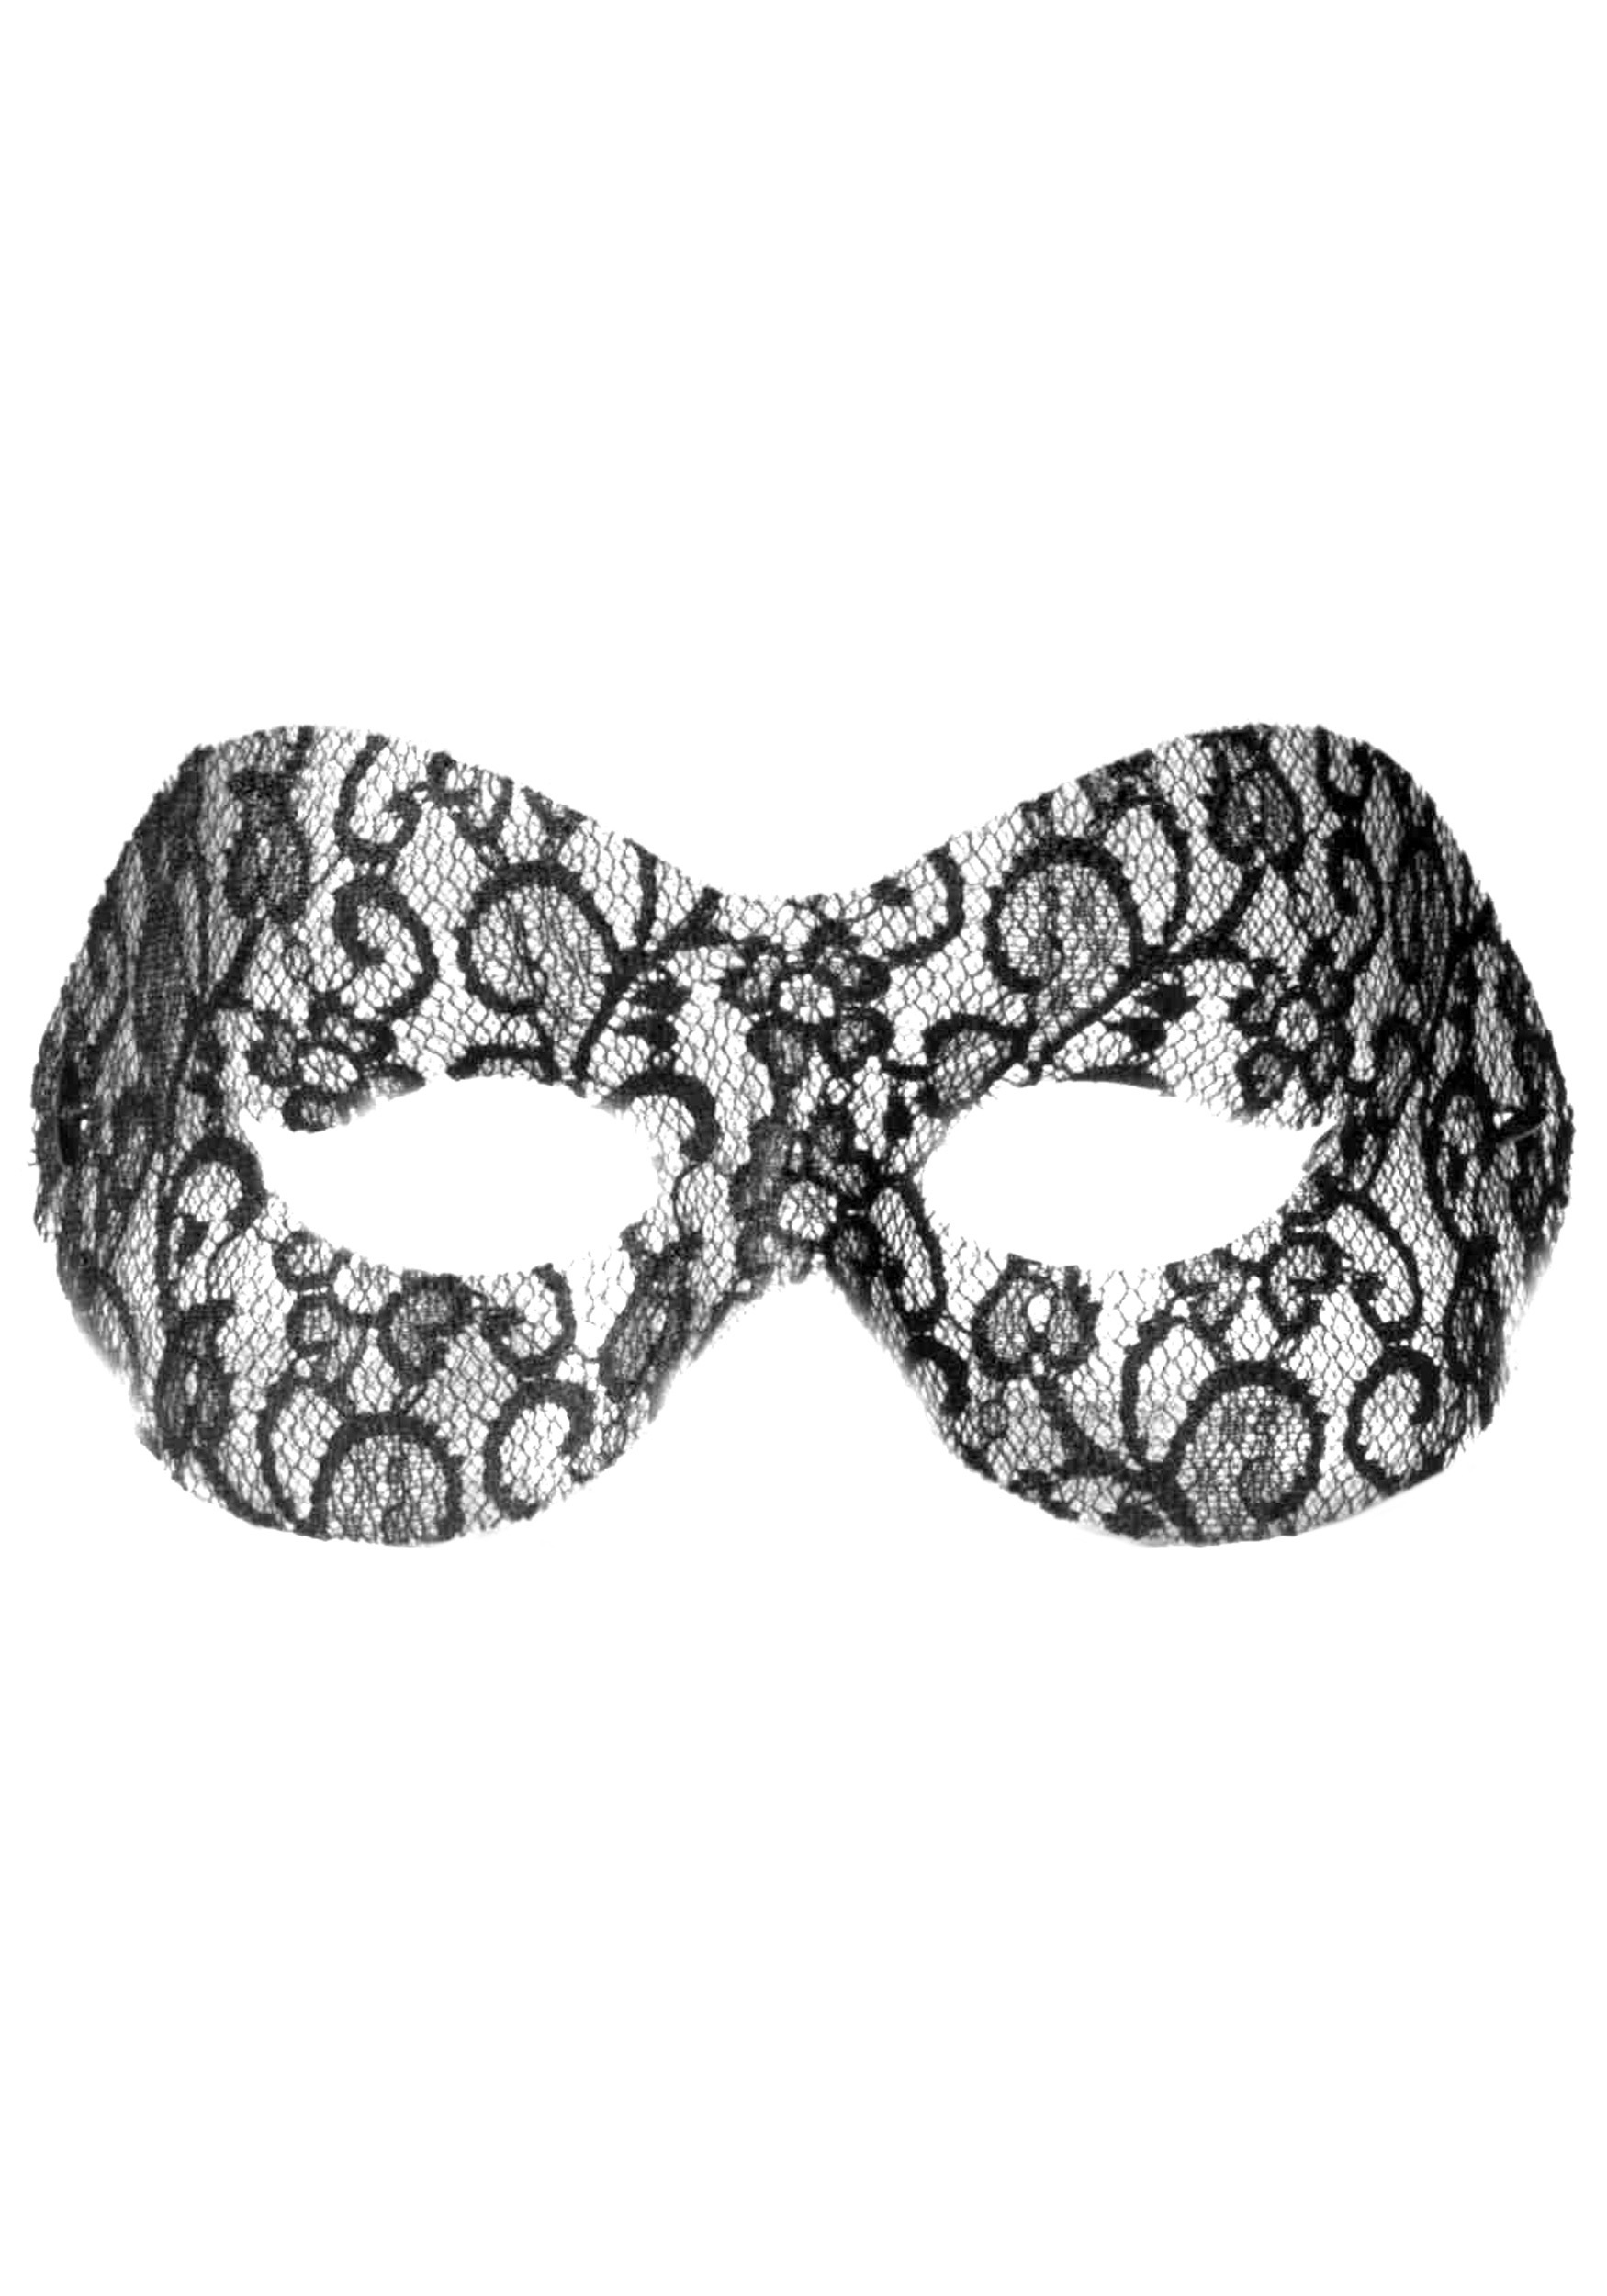 Forum Novelties Lace Eye Mask Of High Quality At Affordable Prices